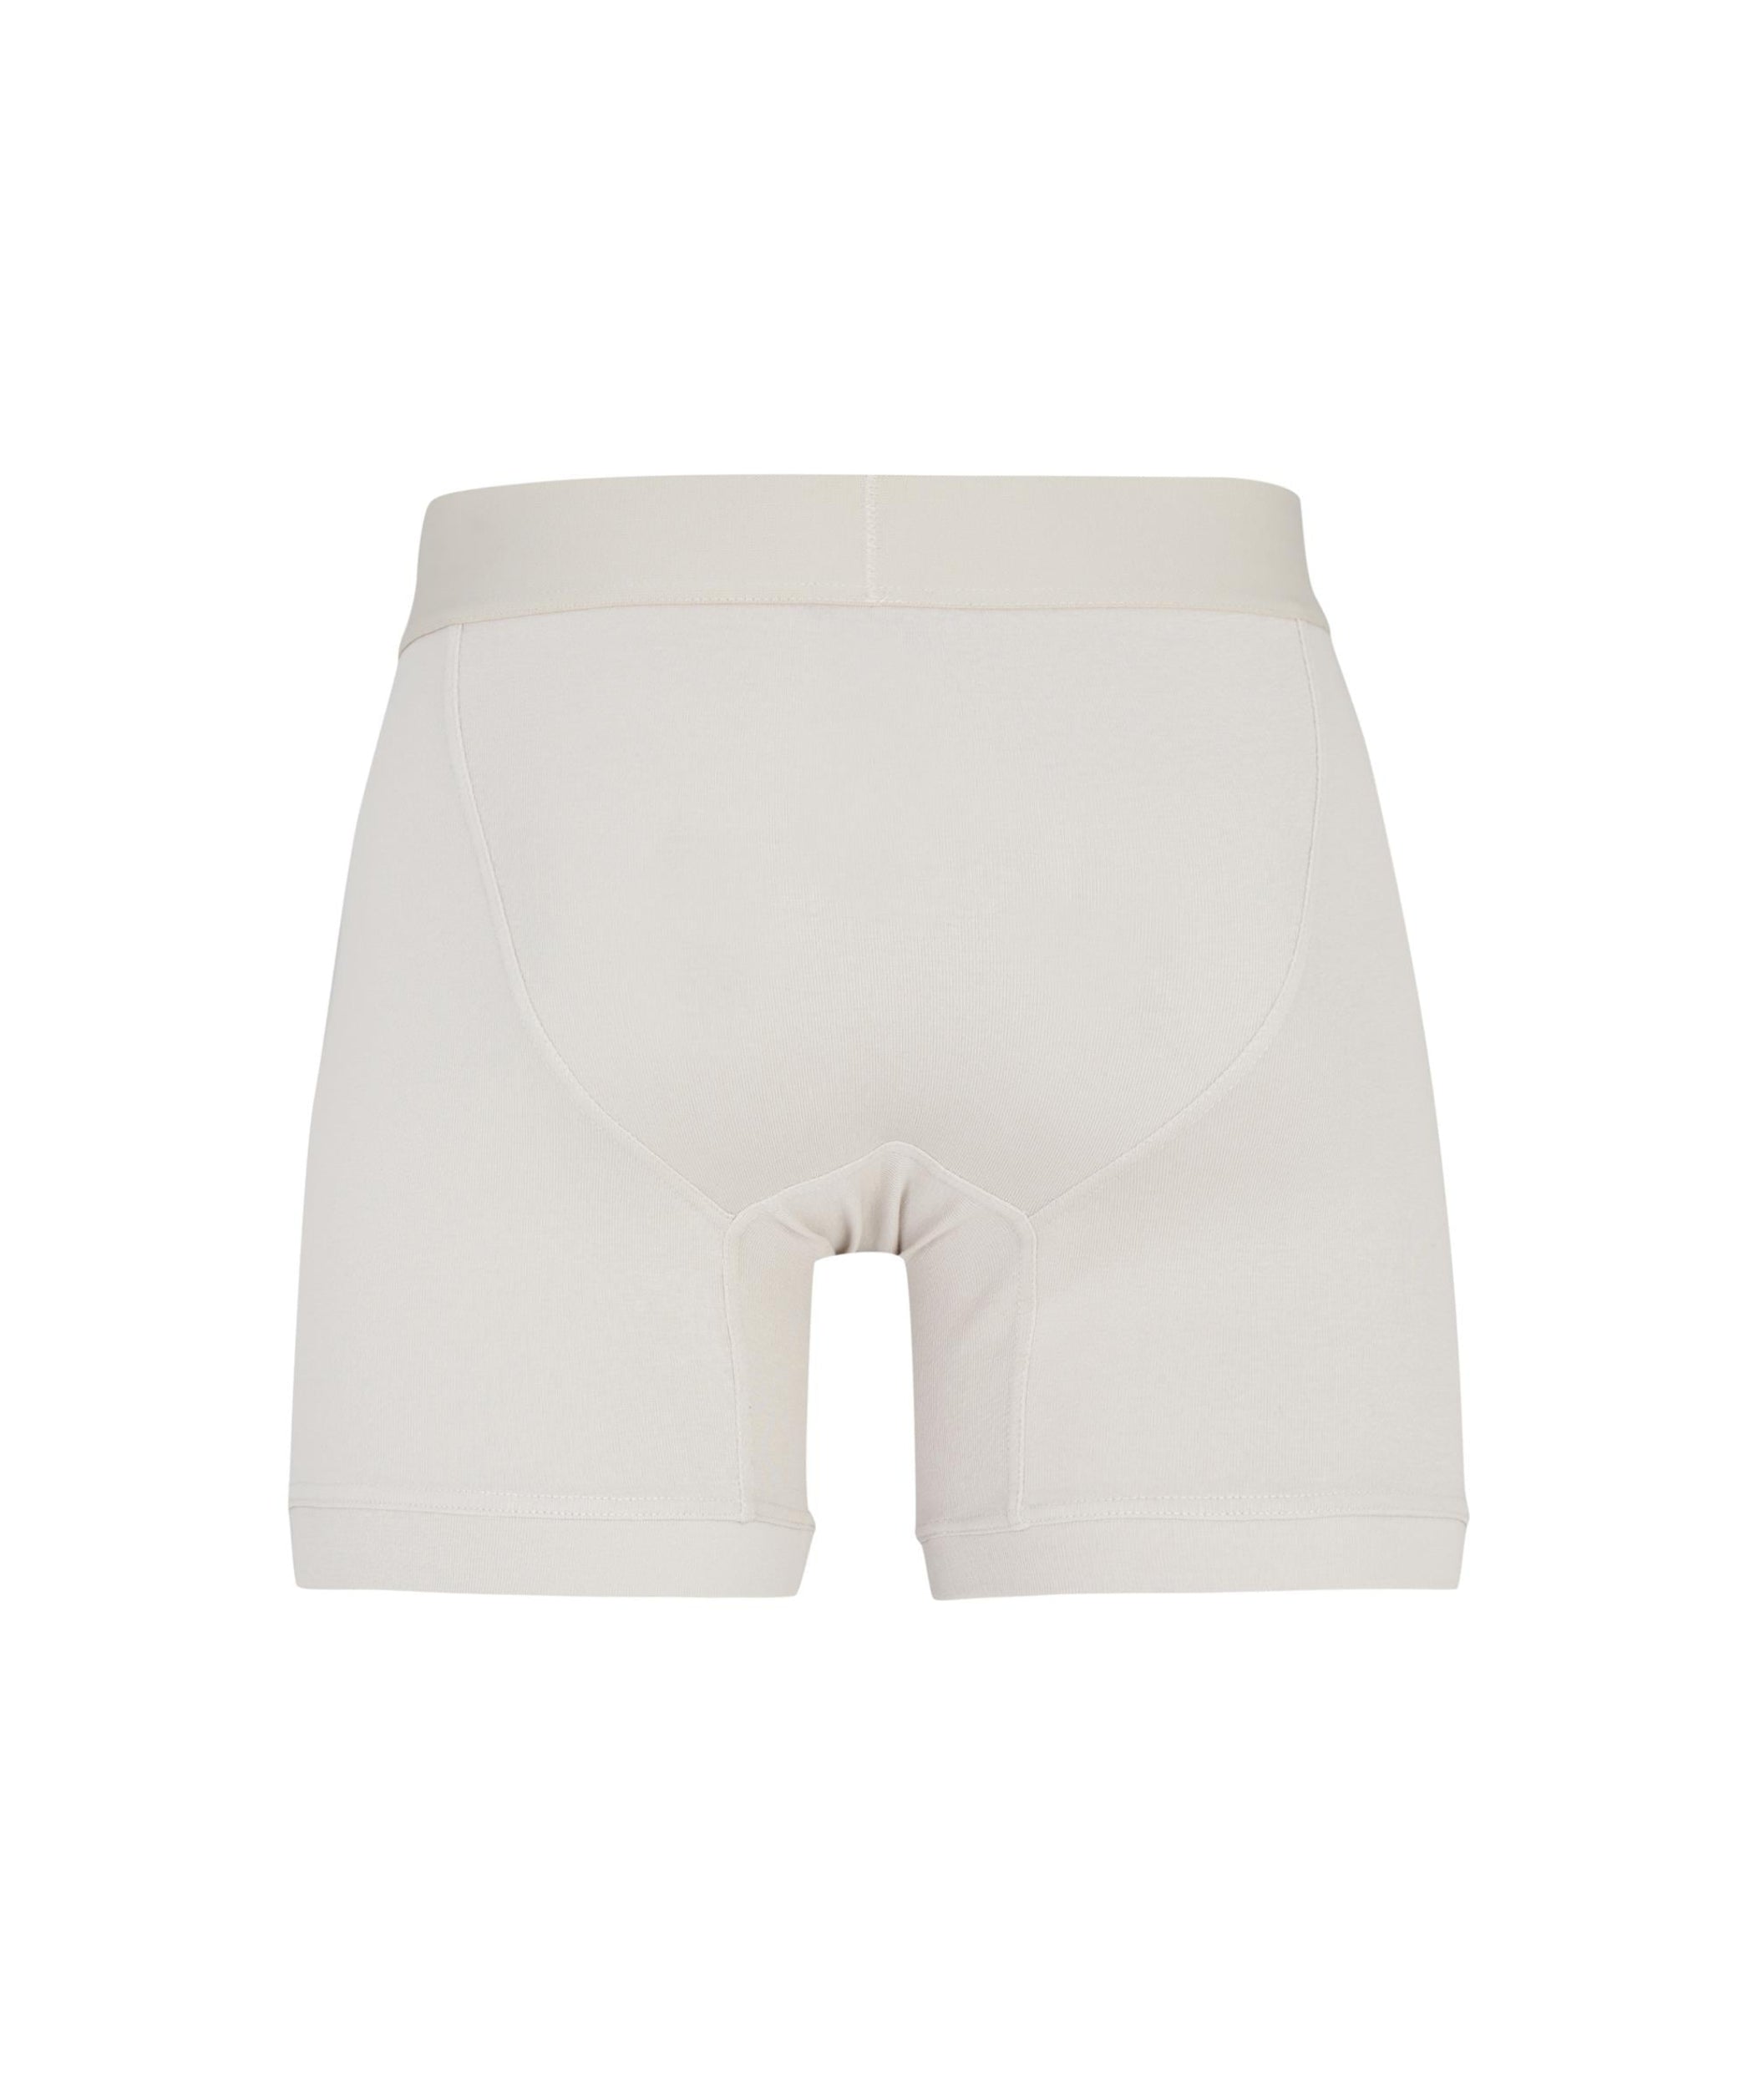 LUXURY HUB FEAR OF GOD 2 PACK BOXER BRIEF